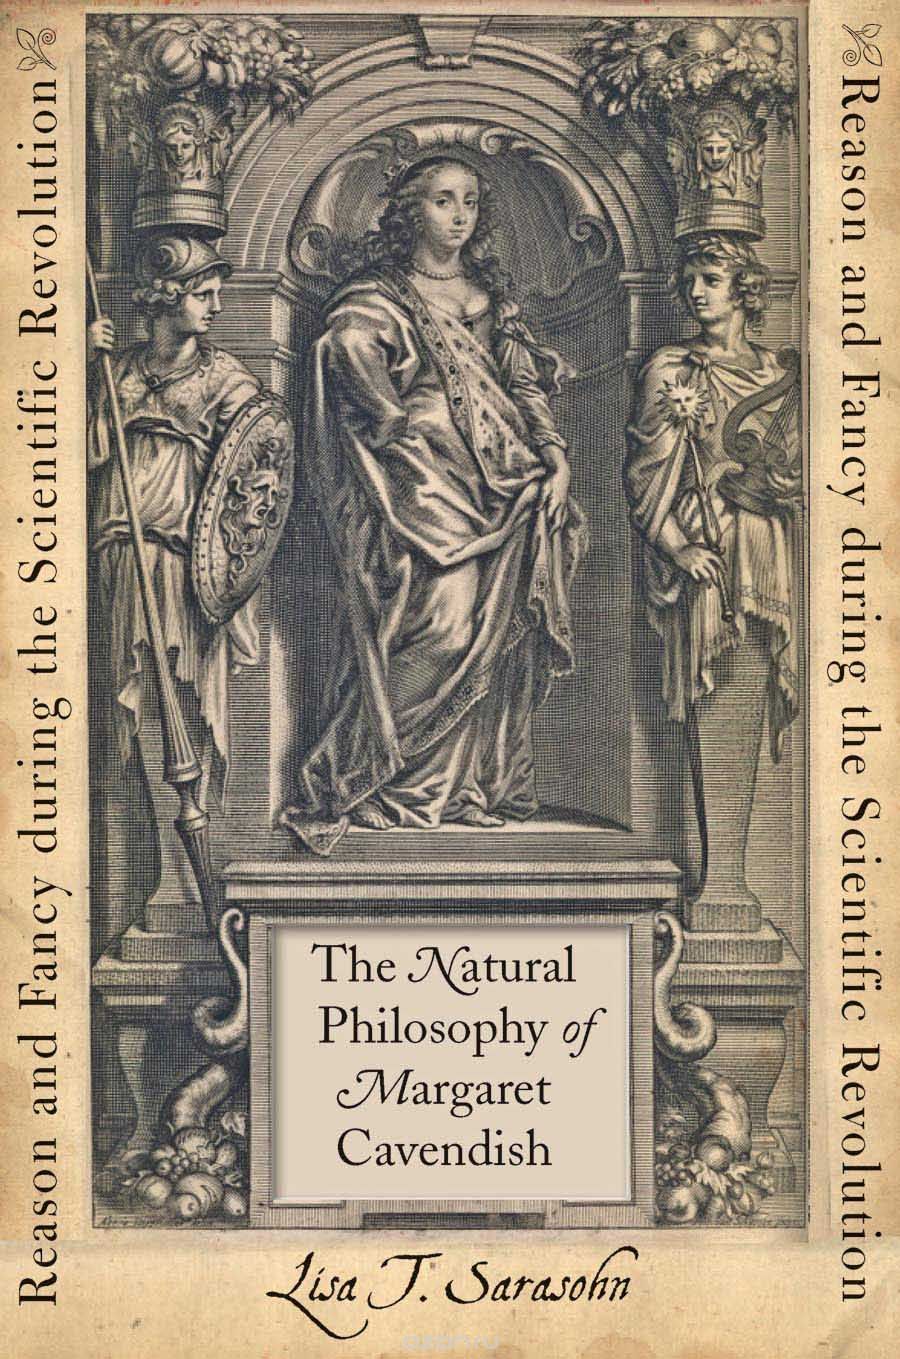 The Natural Philosophy of Margaret Cavendish – Reason and Fancy during the Scientific Revolution